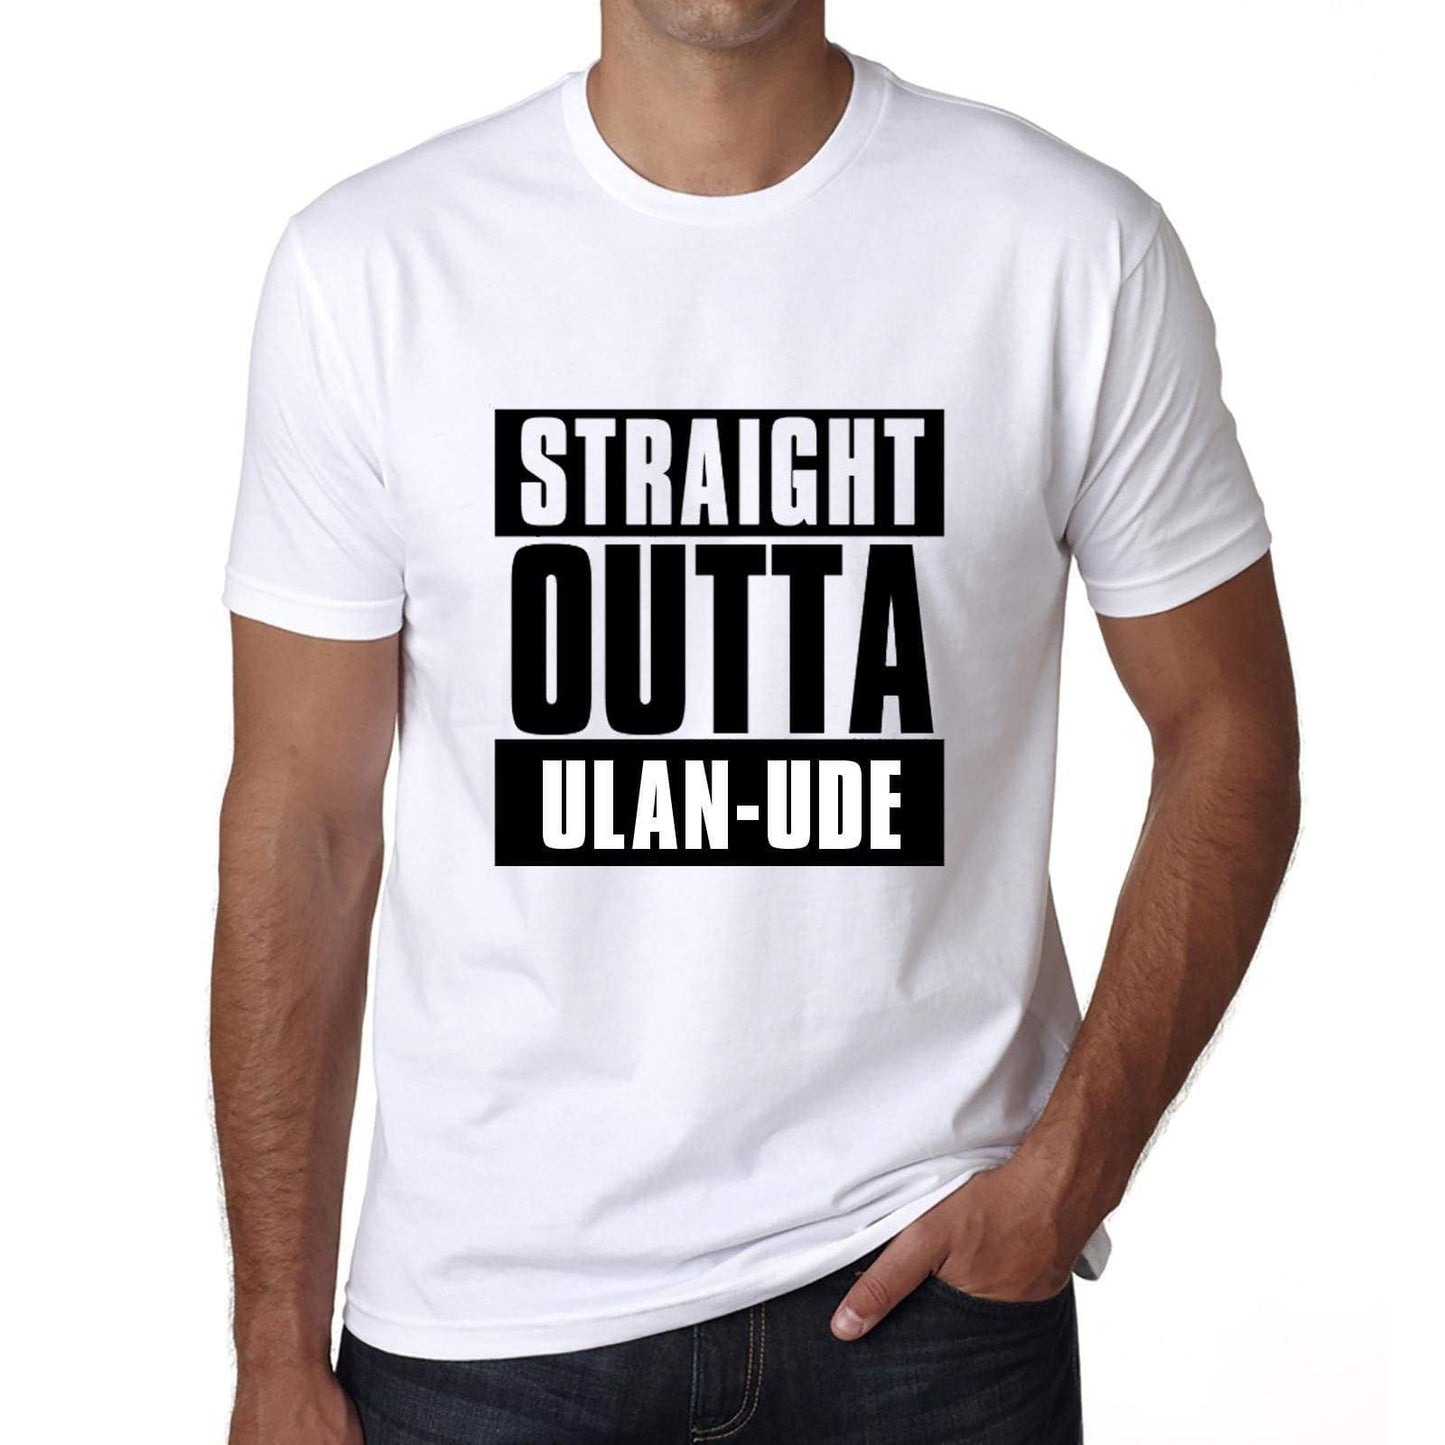 Straight Outta Ulan-Ude Mens Short Sleeve Round Neck T-Shirt 00027 - White / S - Casual